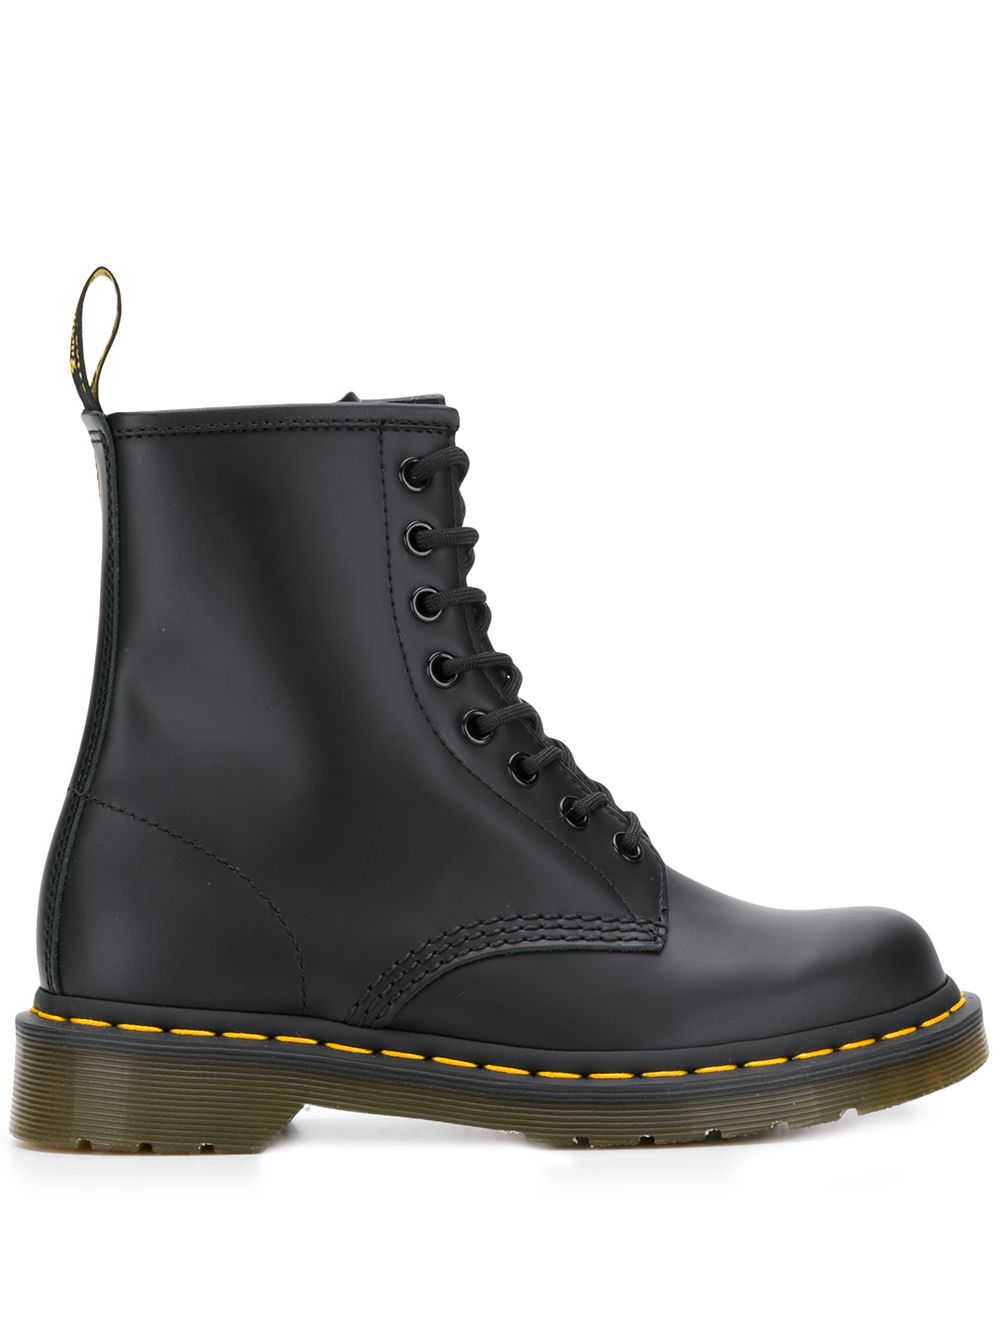 Lace Up Ankle Boots дамски обувки Dr. Martens 843939125_6_5